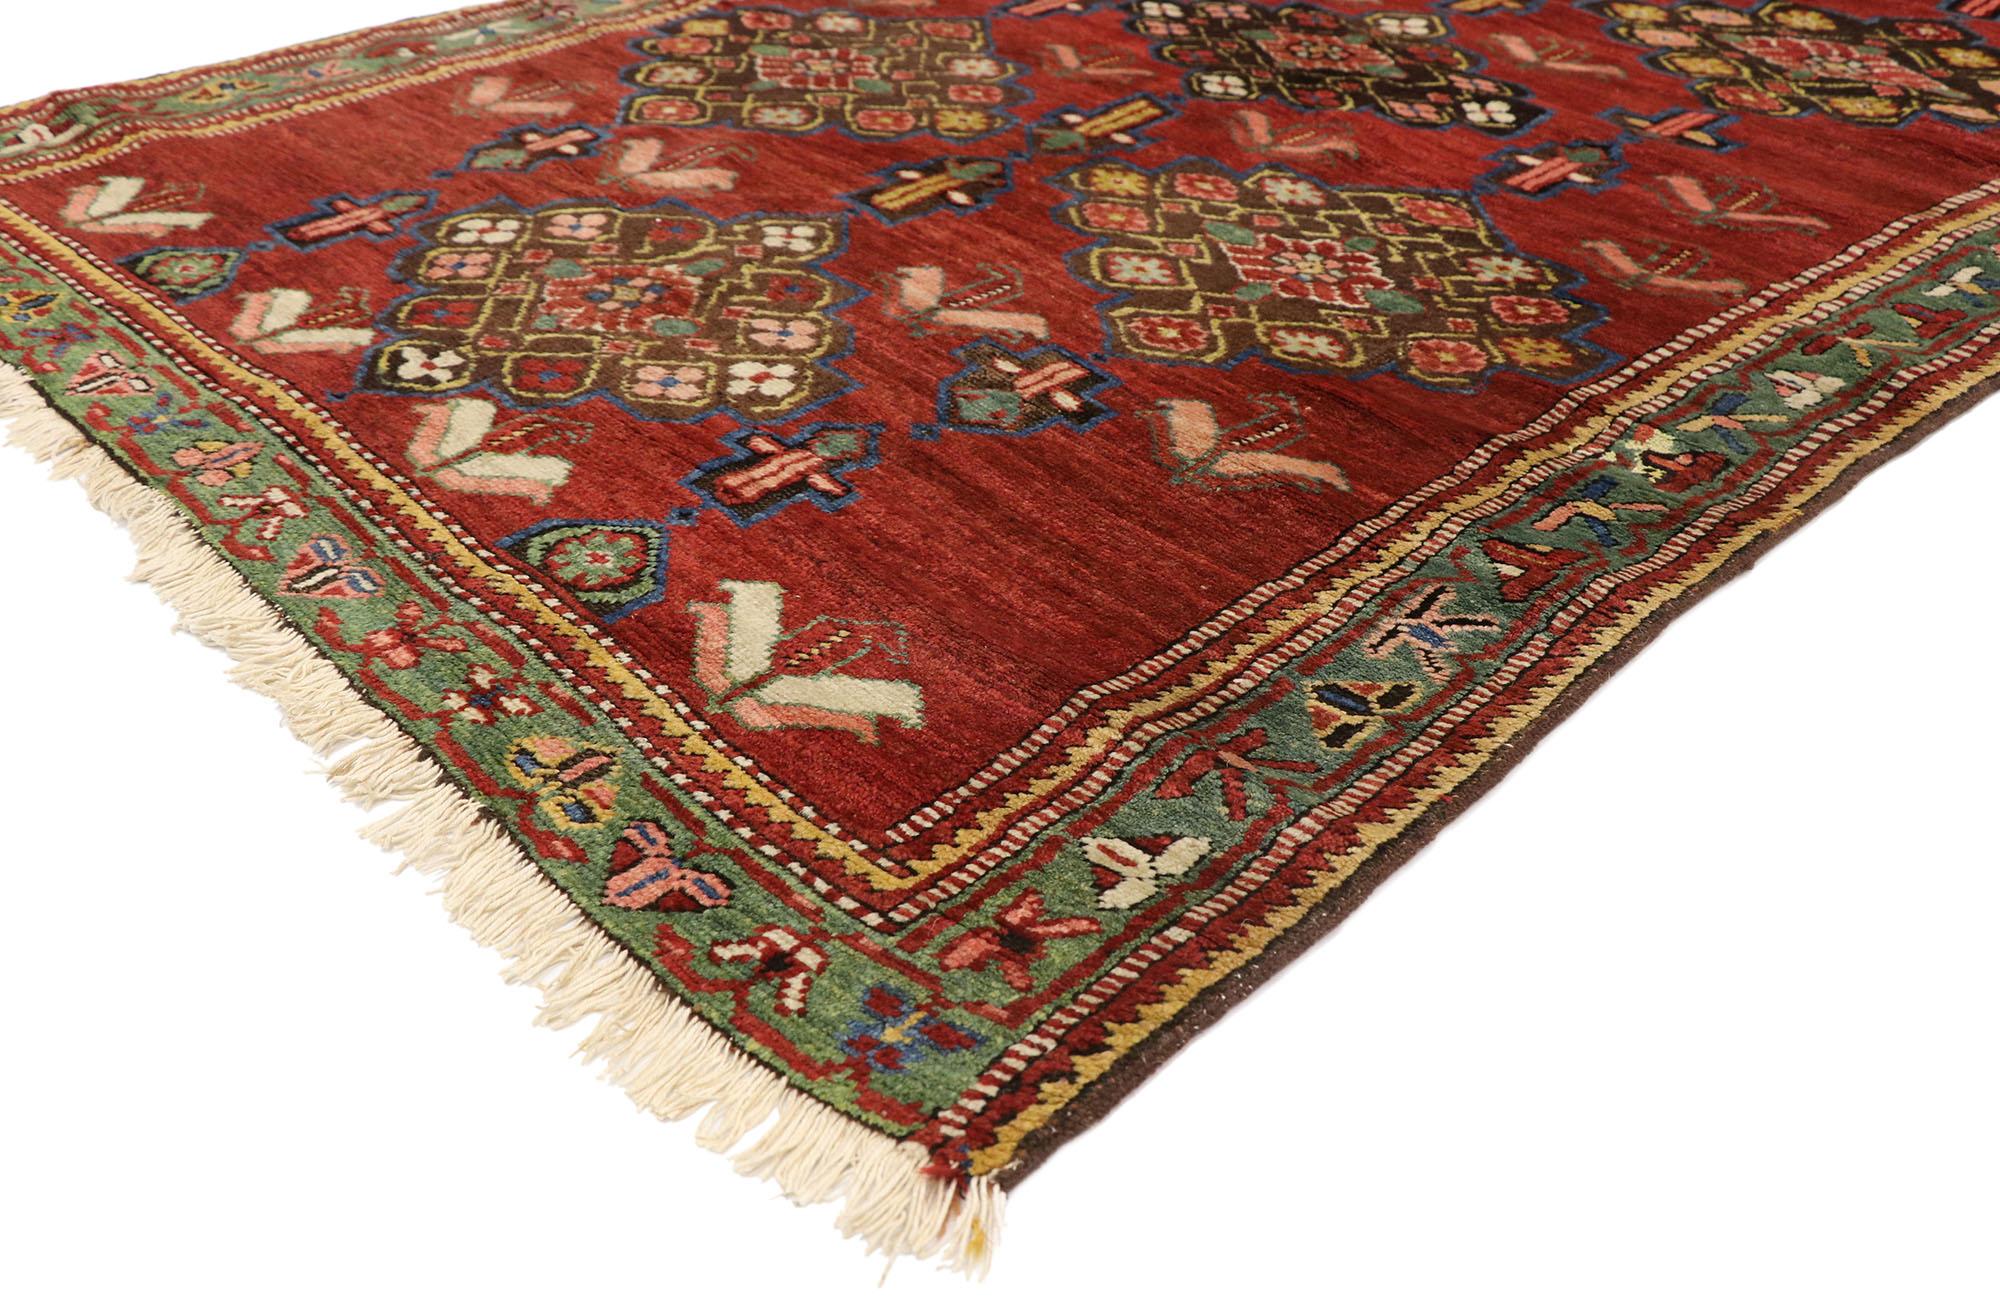 76832 Antique Kurdish Karabagh Runner with Art Deco Style, Wide Hallway Runner 04'07 x 14'07. Reflecting its extraordinary detail and incredible Caucasian artistry, this hand-knotted wool antique Kurdish Karabagh runner with Art Deco style displays